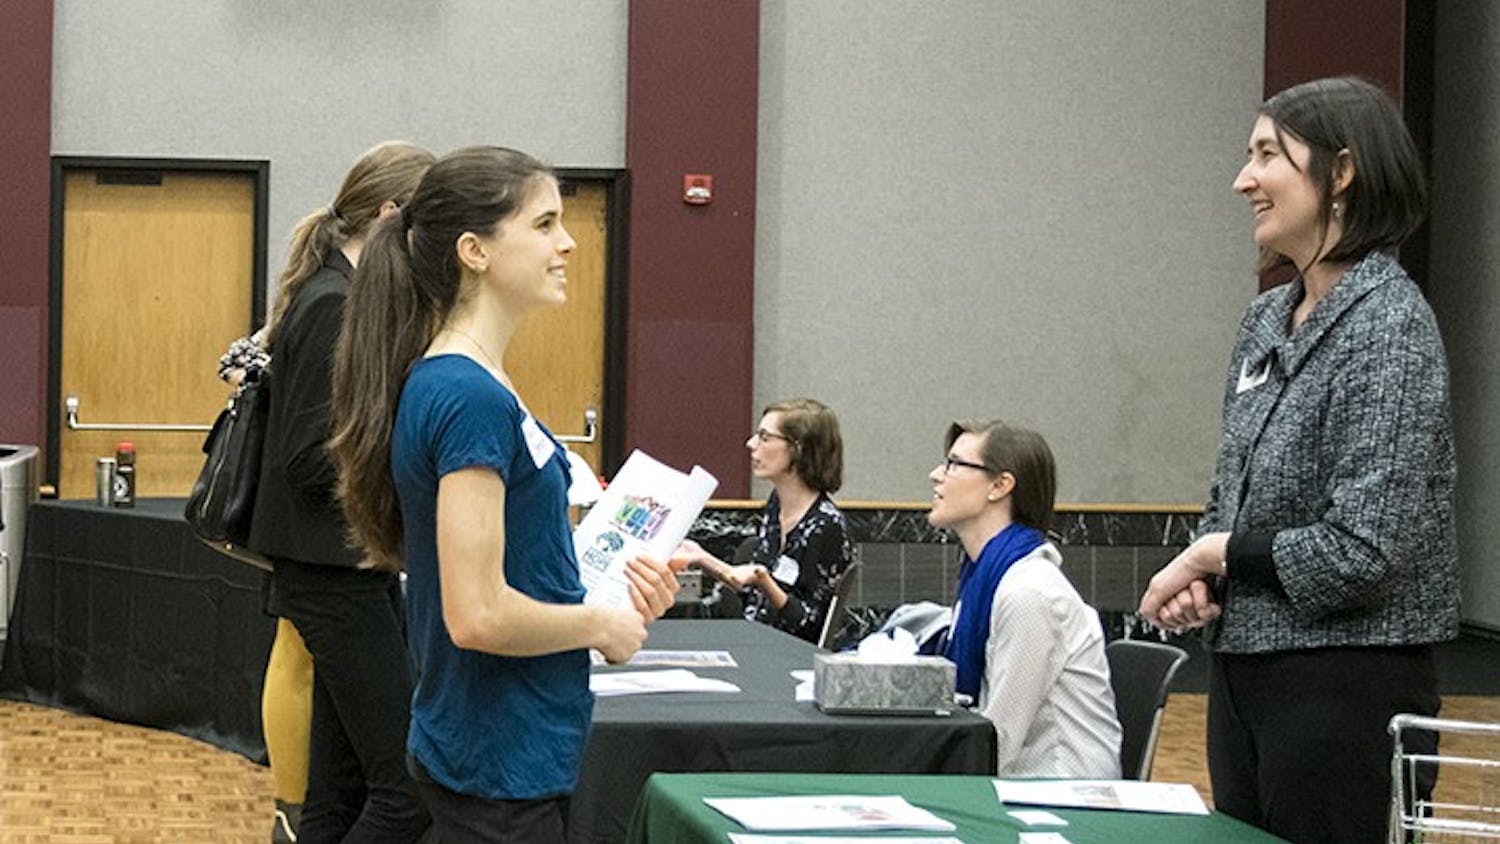 Students had the opportunity to learn about careers and internships in the field of sustainability, a category that is often underrepresented at general career fairs.